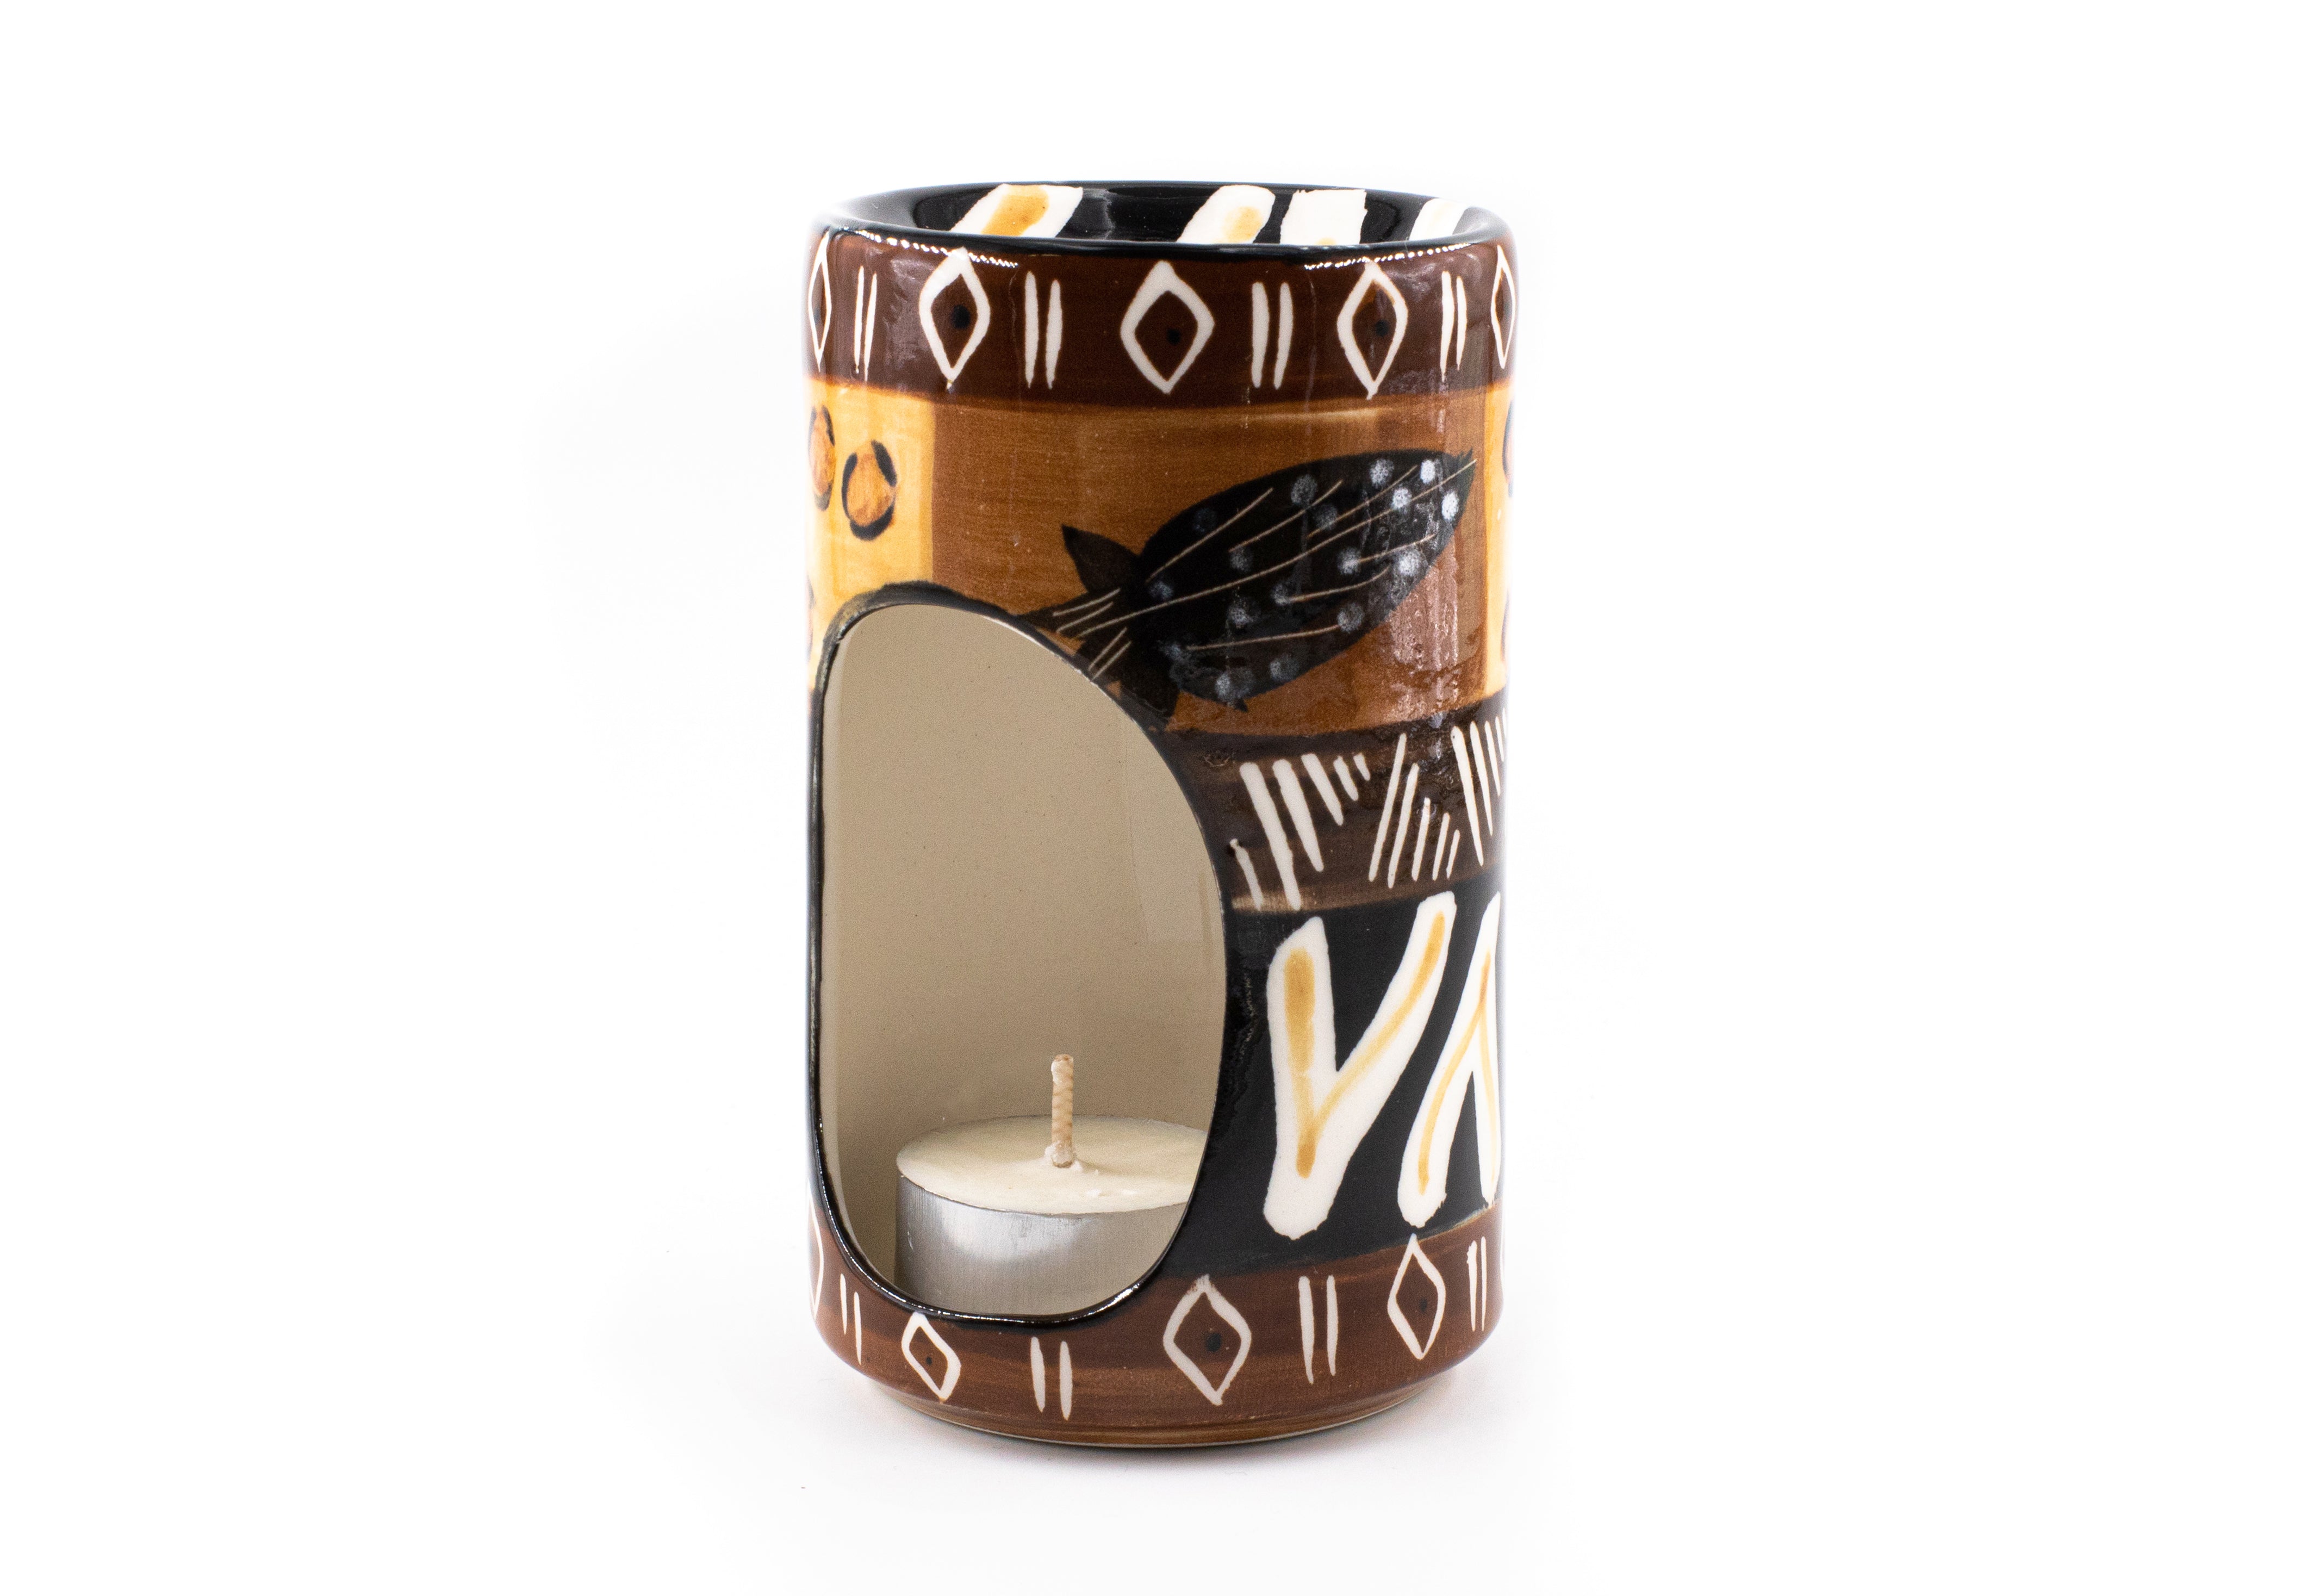 Animal Print hand made and hand painted ceramic scent candle burner.